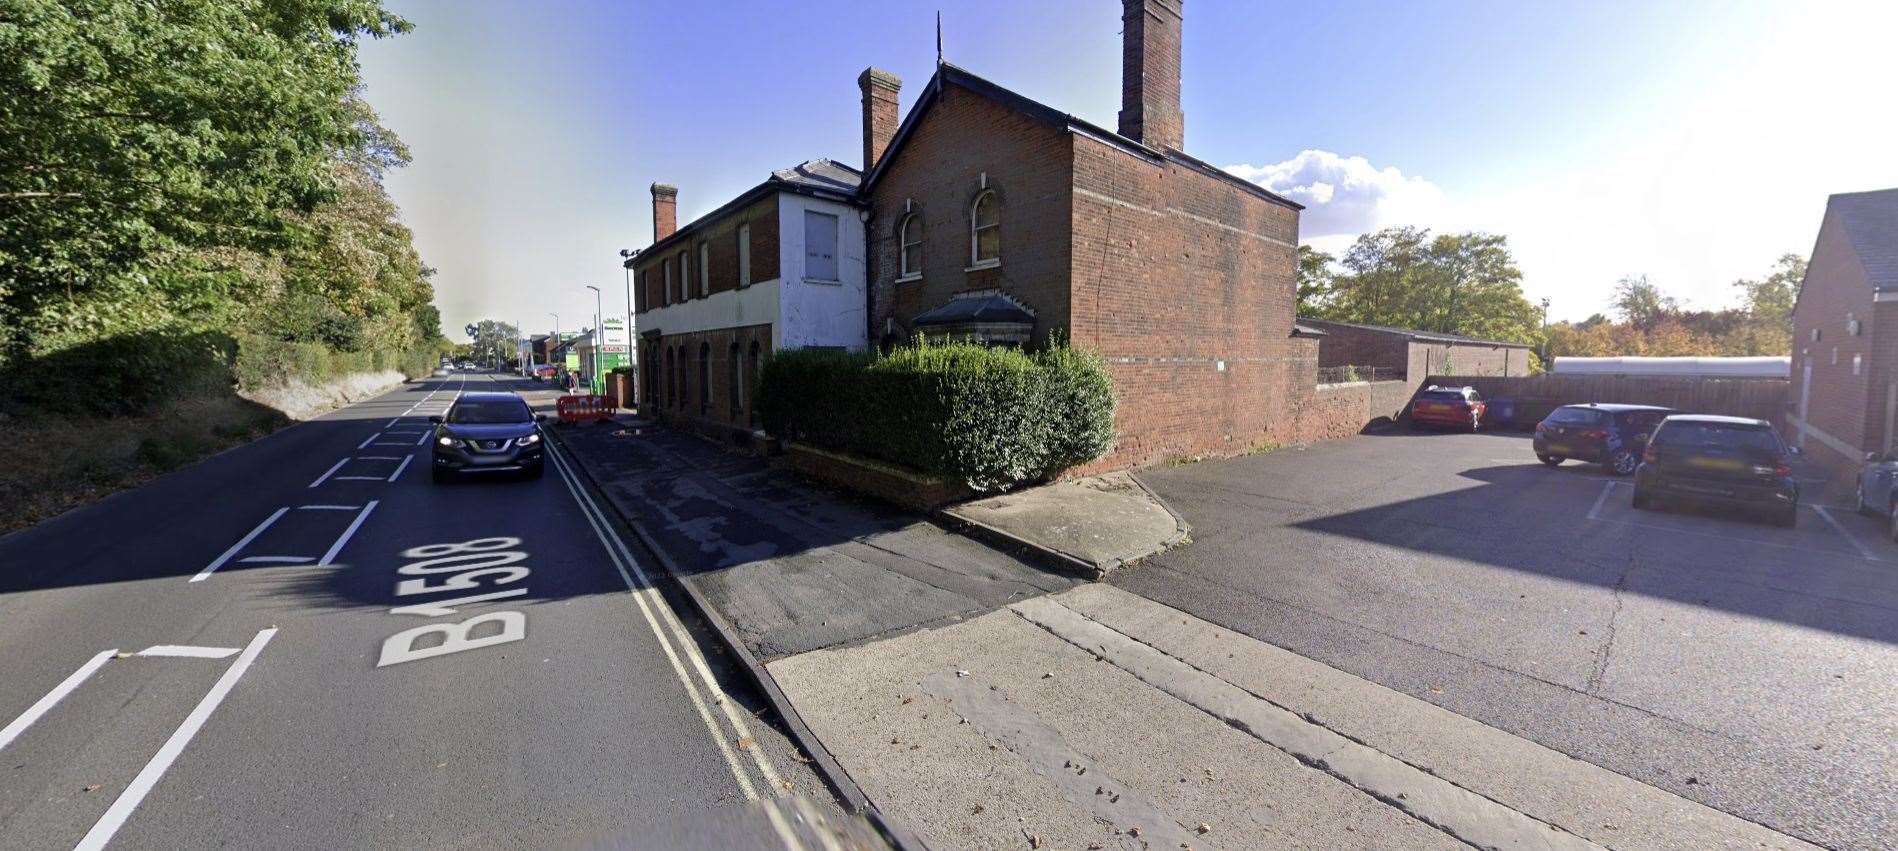 The site of Oliver's Brewery, in Cornard Road, Sudbury, will be converted into six flats after planning permission was granted. Picture: Google Maps